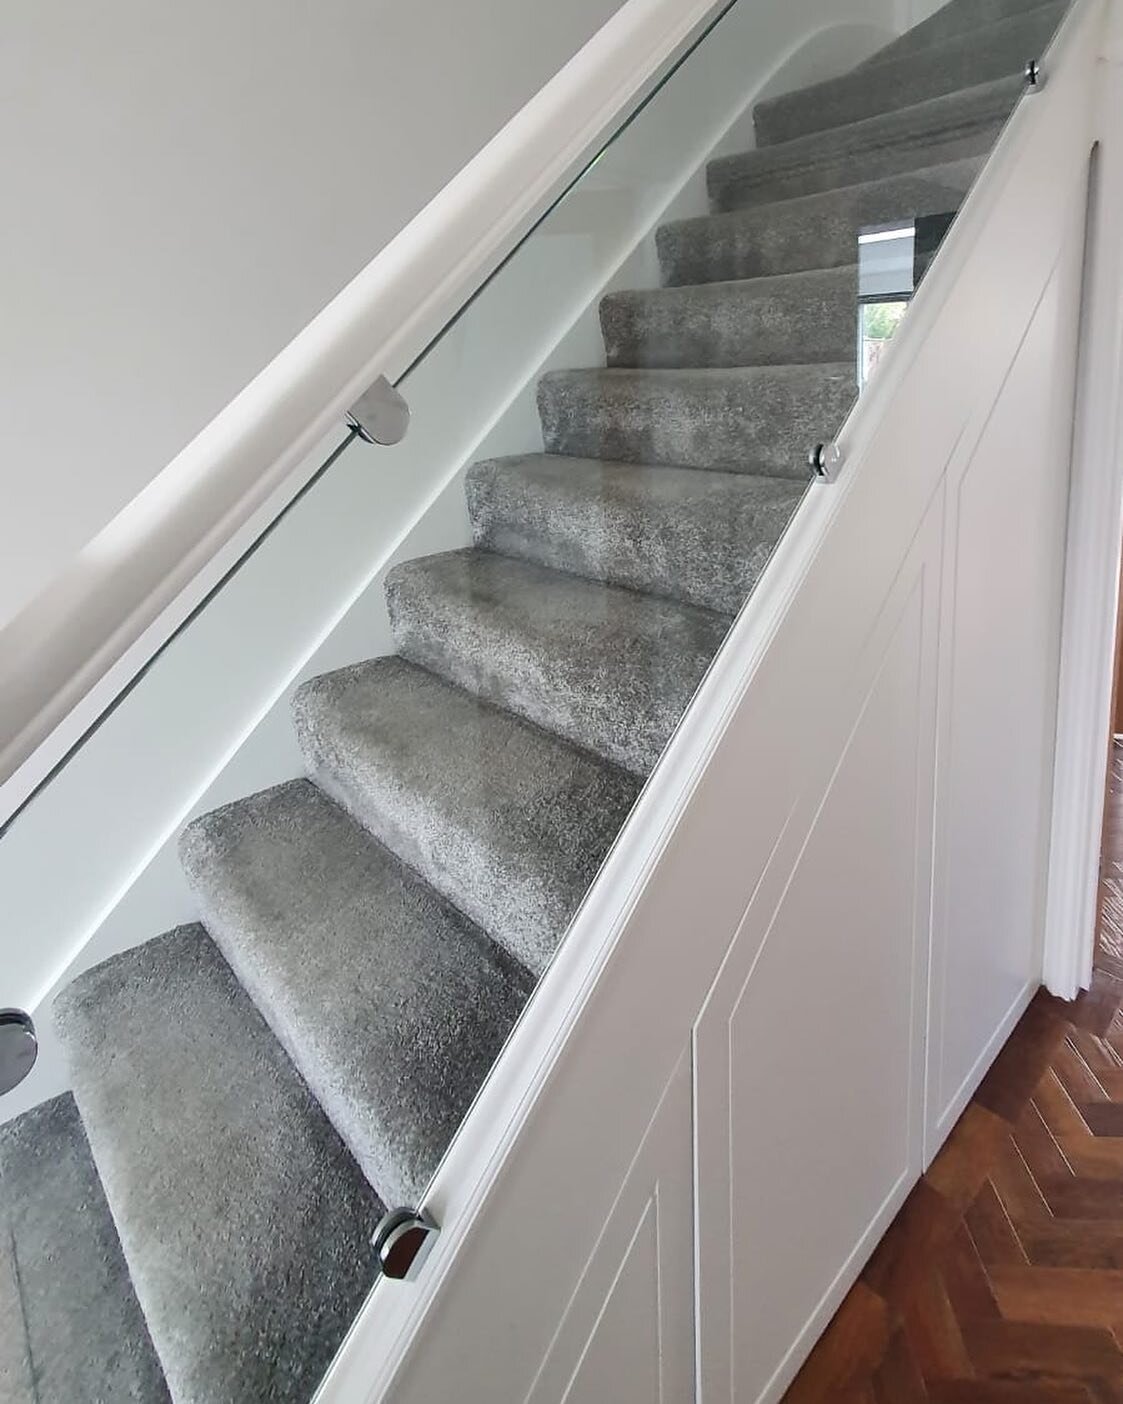 One of our most recent renovations... glass bannister, built in under stairs cupboards. 😍
#makingahouseahome #glass #glassbannister #cupboard #refresh #fresh #new #stairs #home #renovation #inspiration #inspo #new